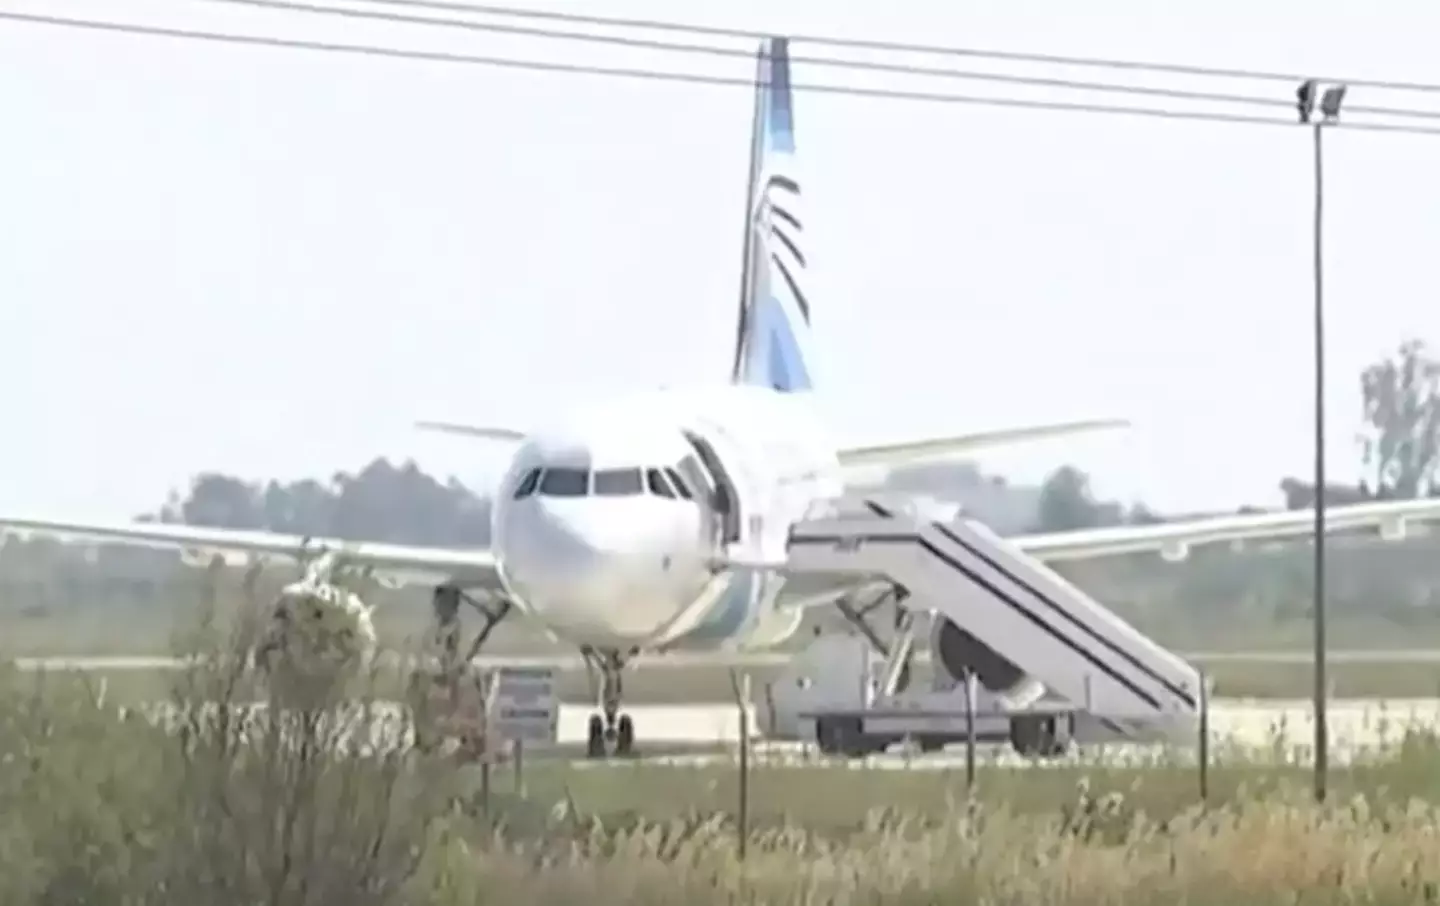 The hijacked plane sitting in a remote area of the airport at Larnaca.